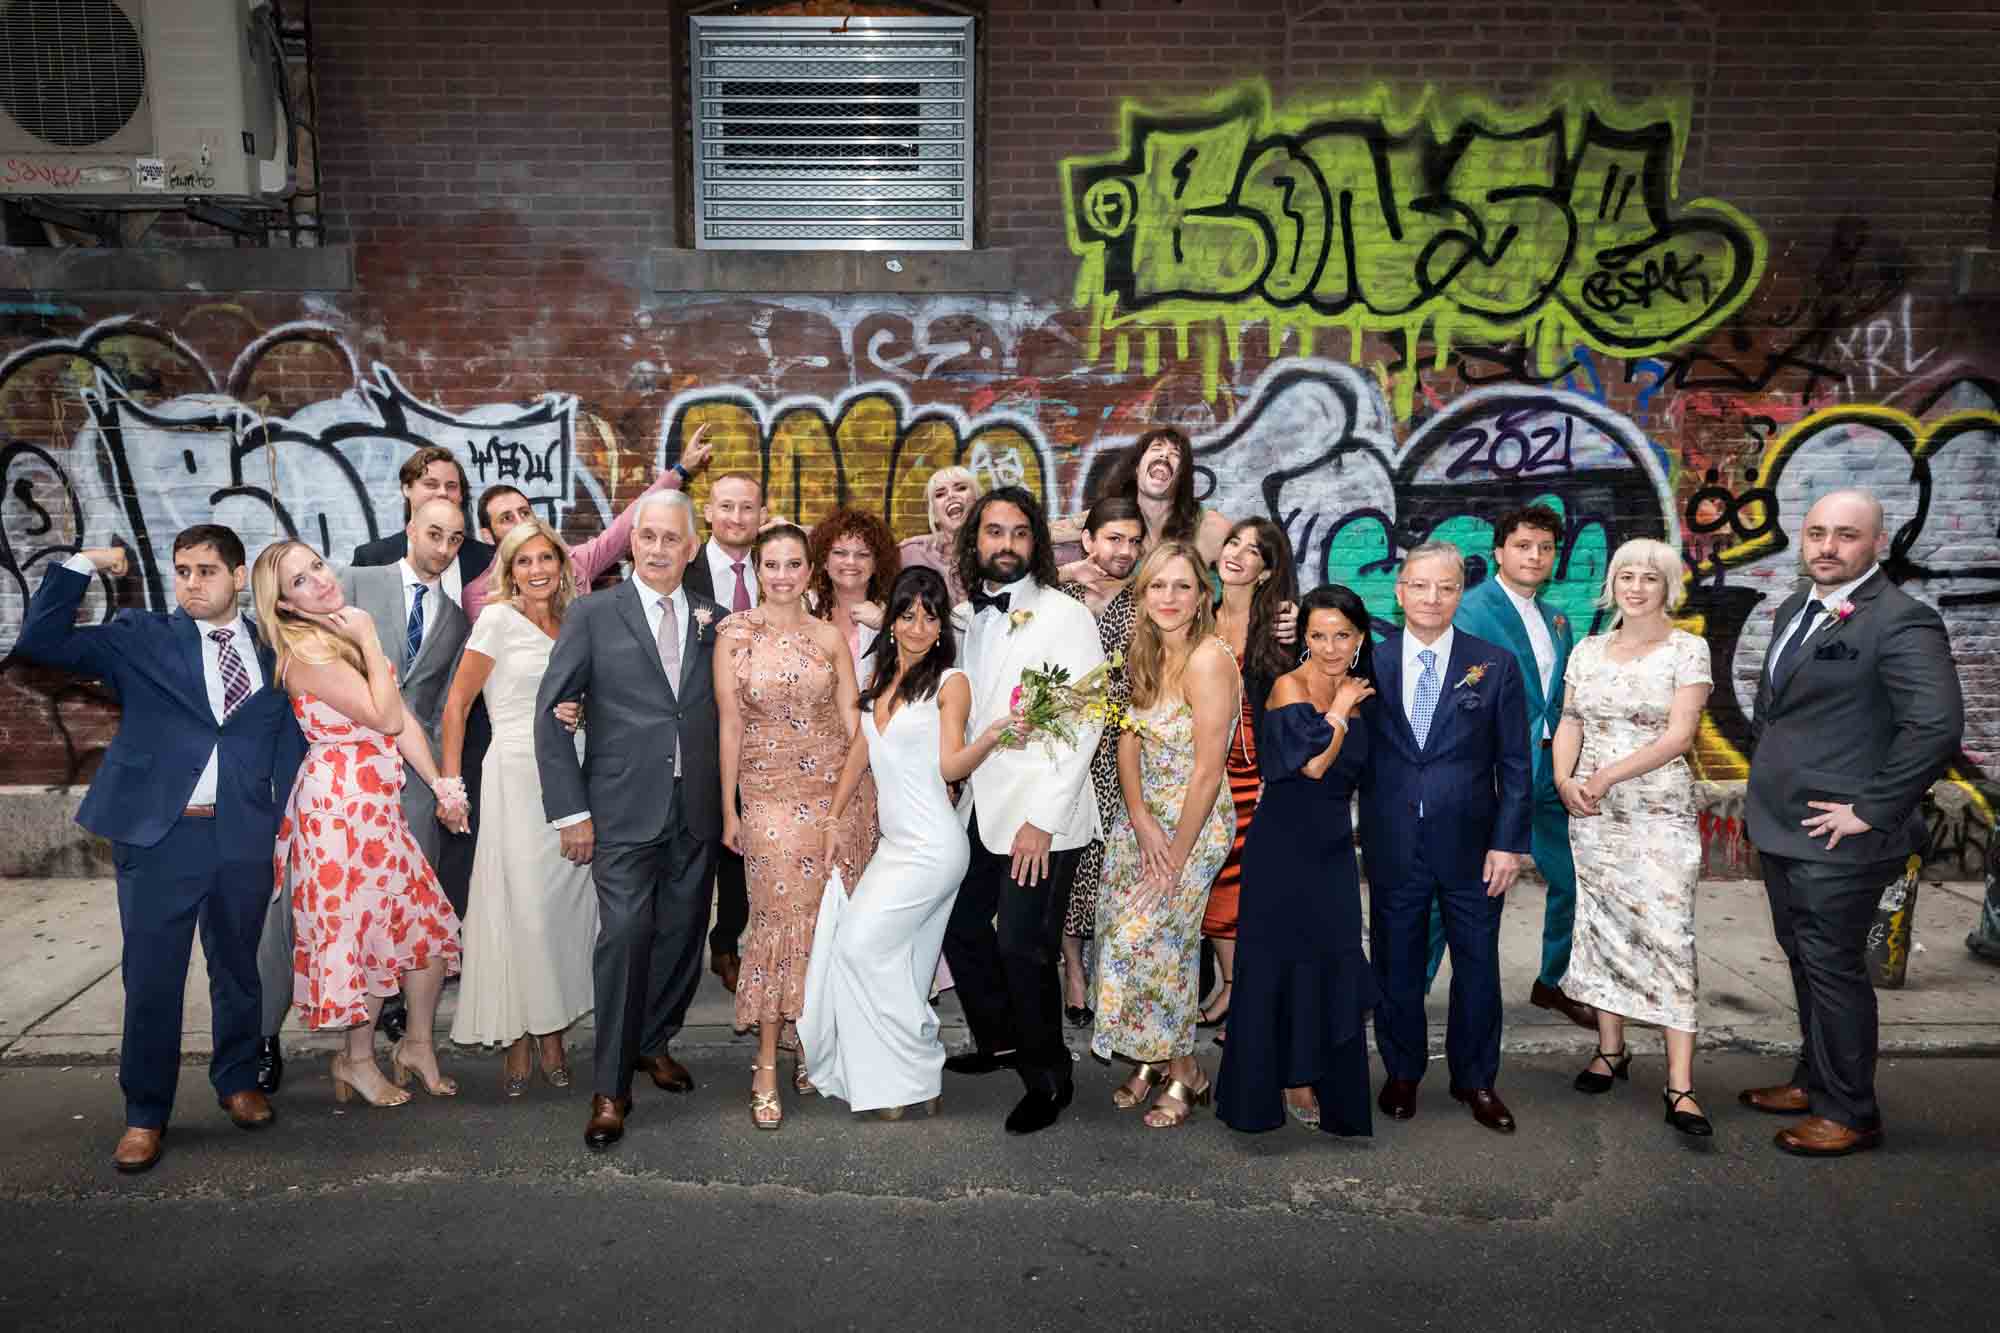 Group photo of family and friends making funny faces in front of graffiti at a Housing Works wedding